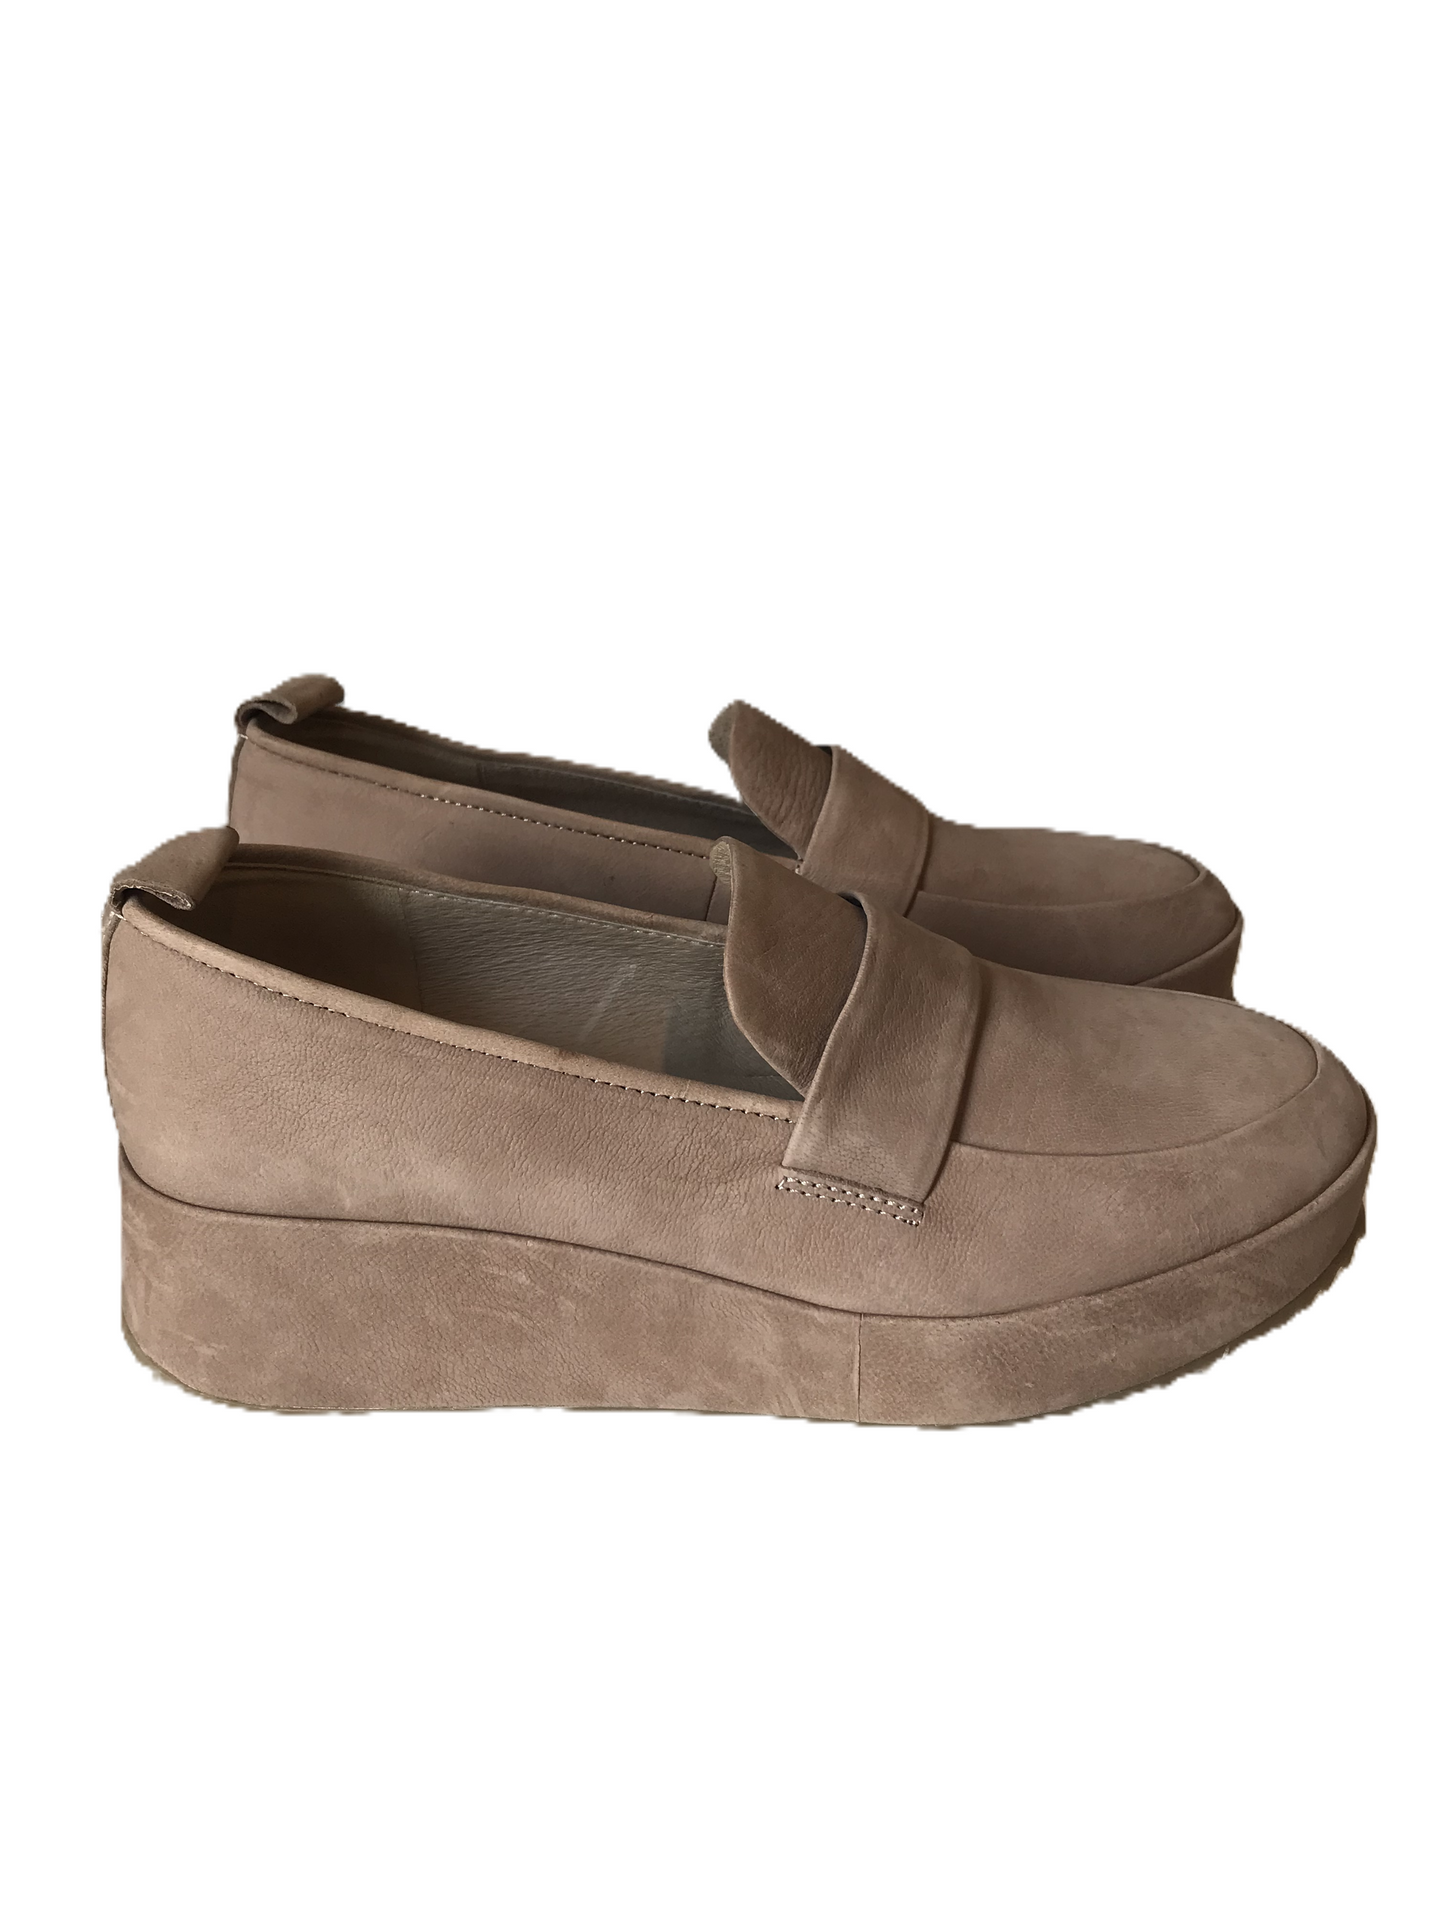 Tan Shoes Heels Platform By Eileen Fisher, Size: 8.5